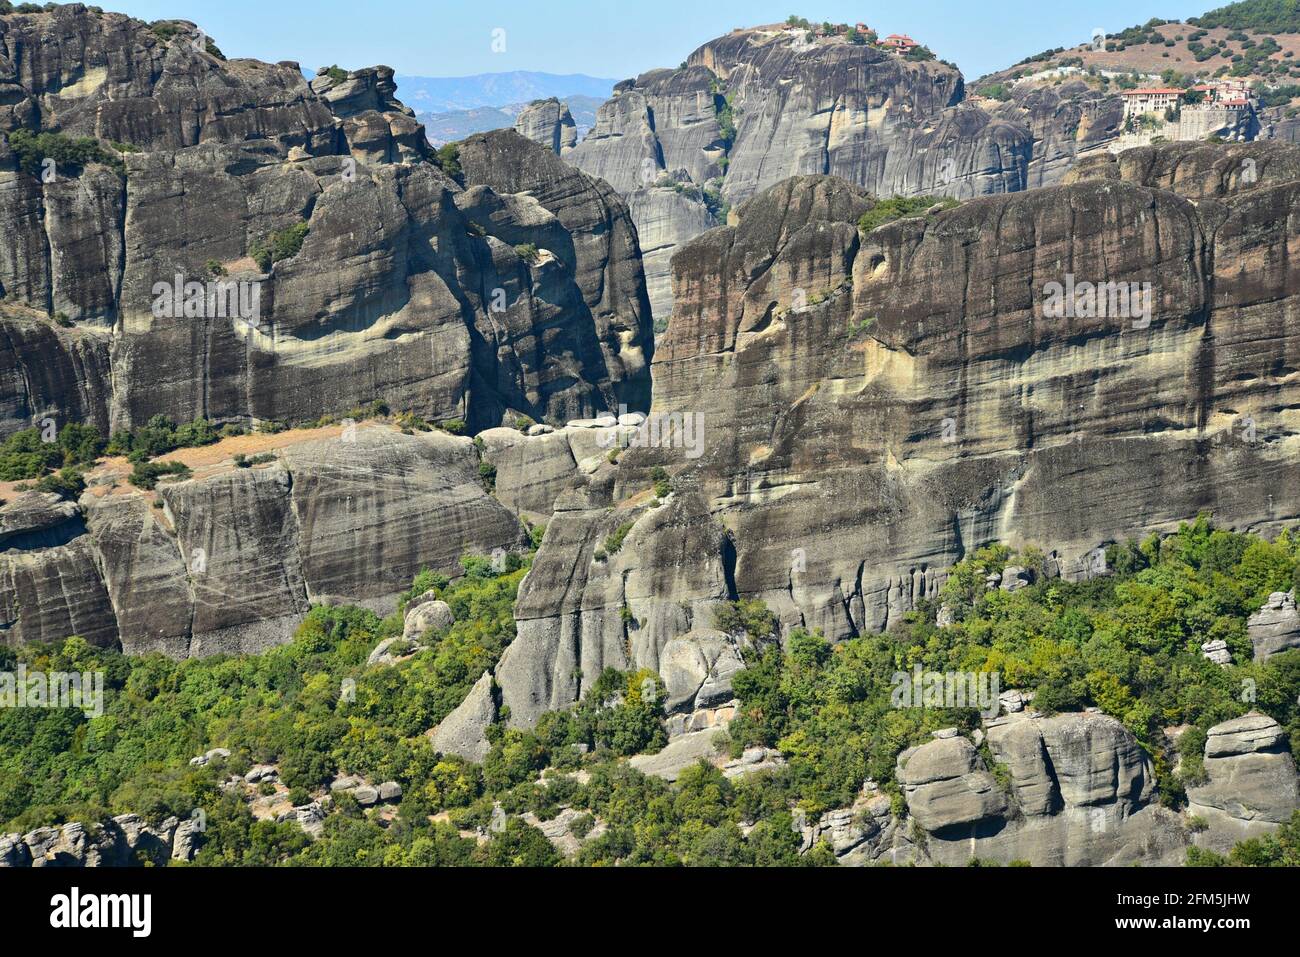 Spectacular panoramic landscape with sandstone rock formations created during the Paleogene Period in Meteora, Kalambaka Thessaly, Greece. Stock Photo